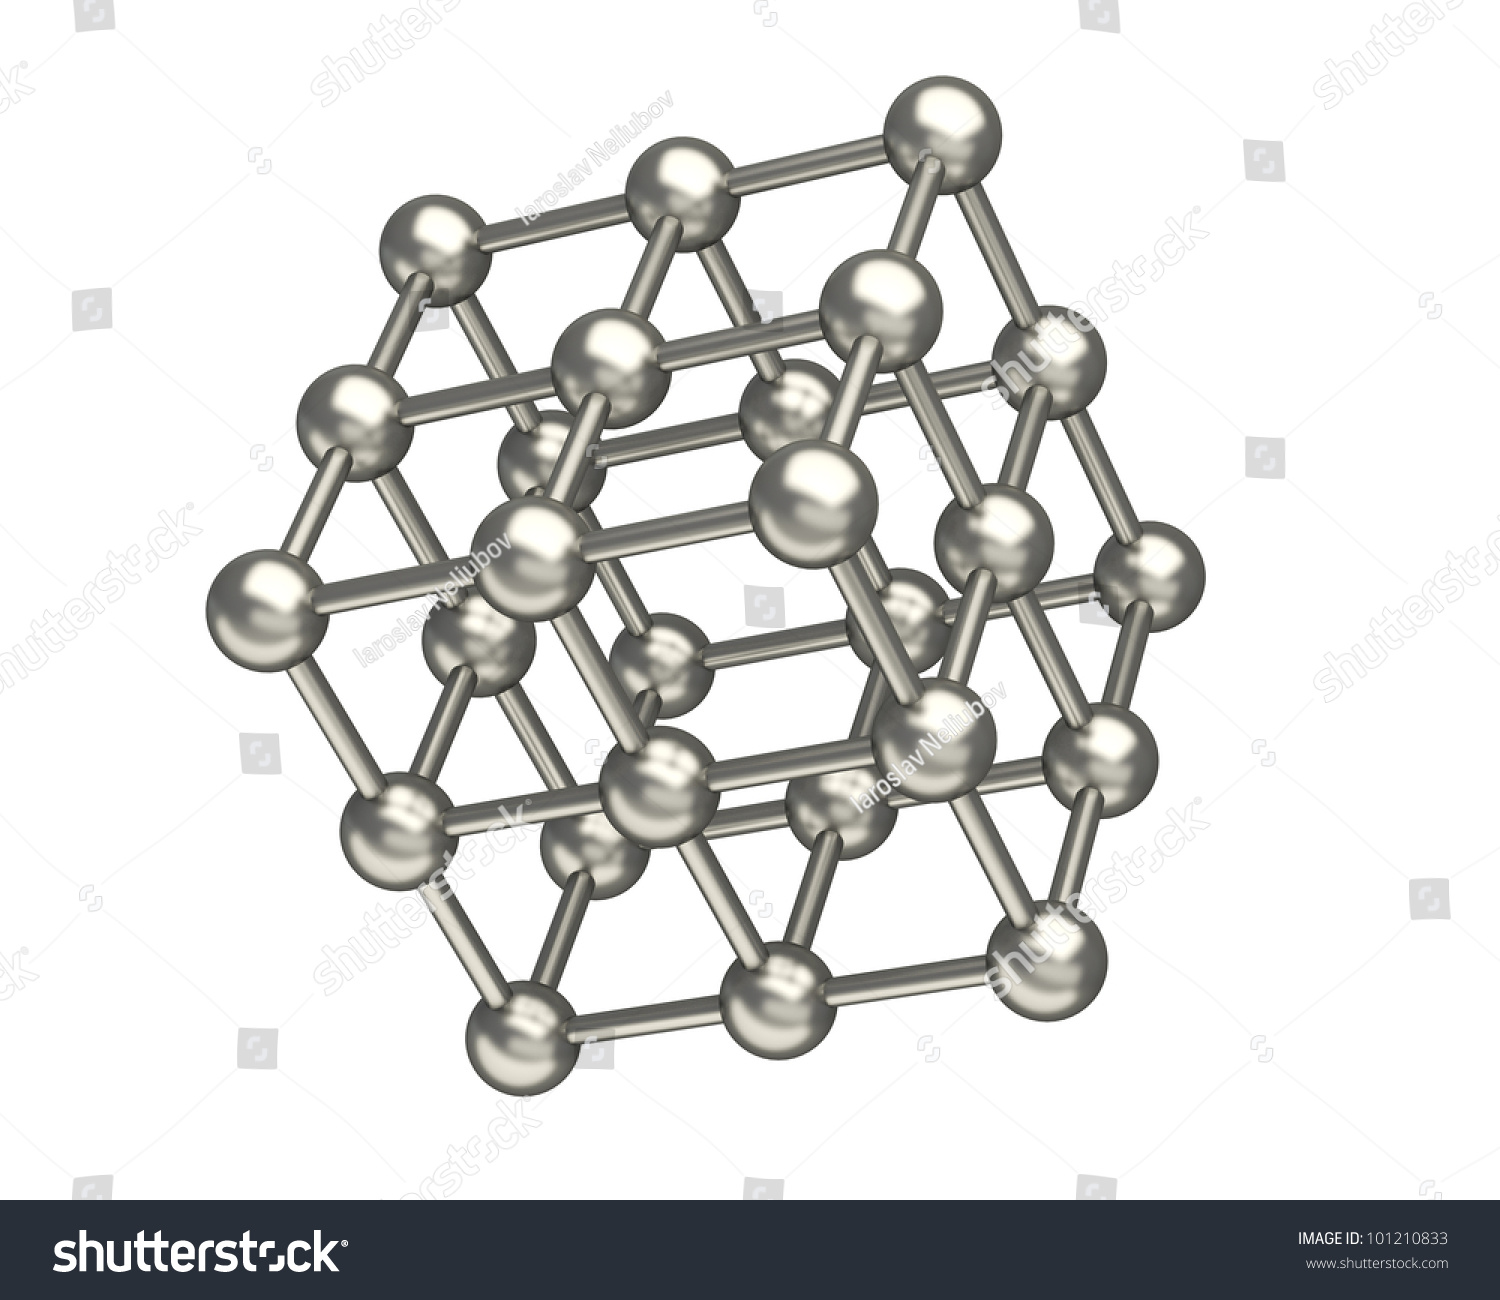 3d Rendered Silver Glossy Molecules Structure Isolated On White ...